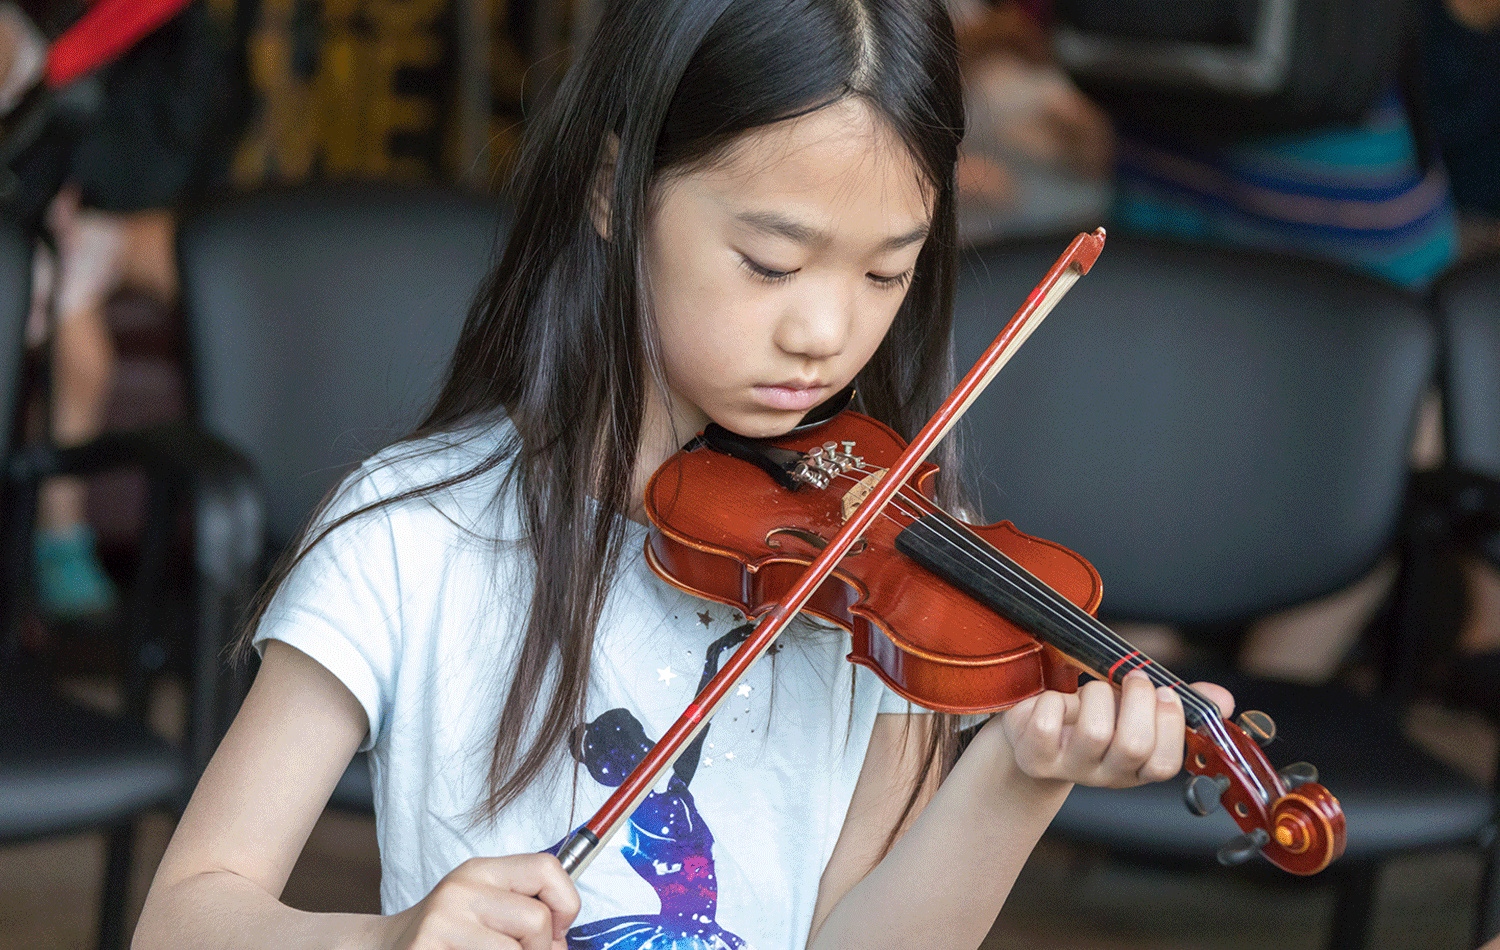 A young girl playing a violin